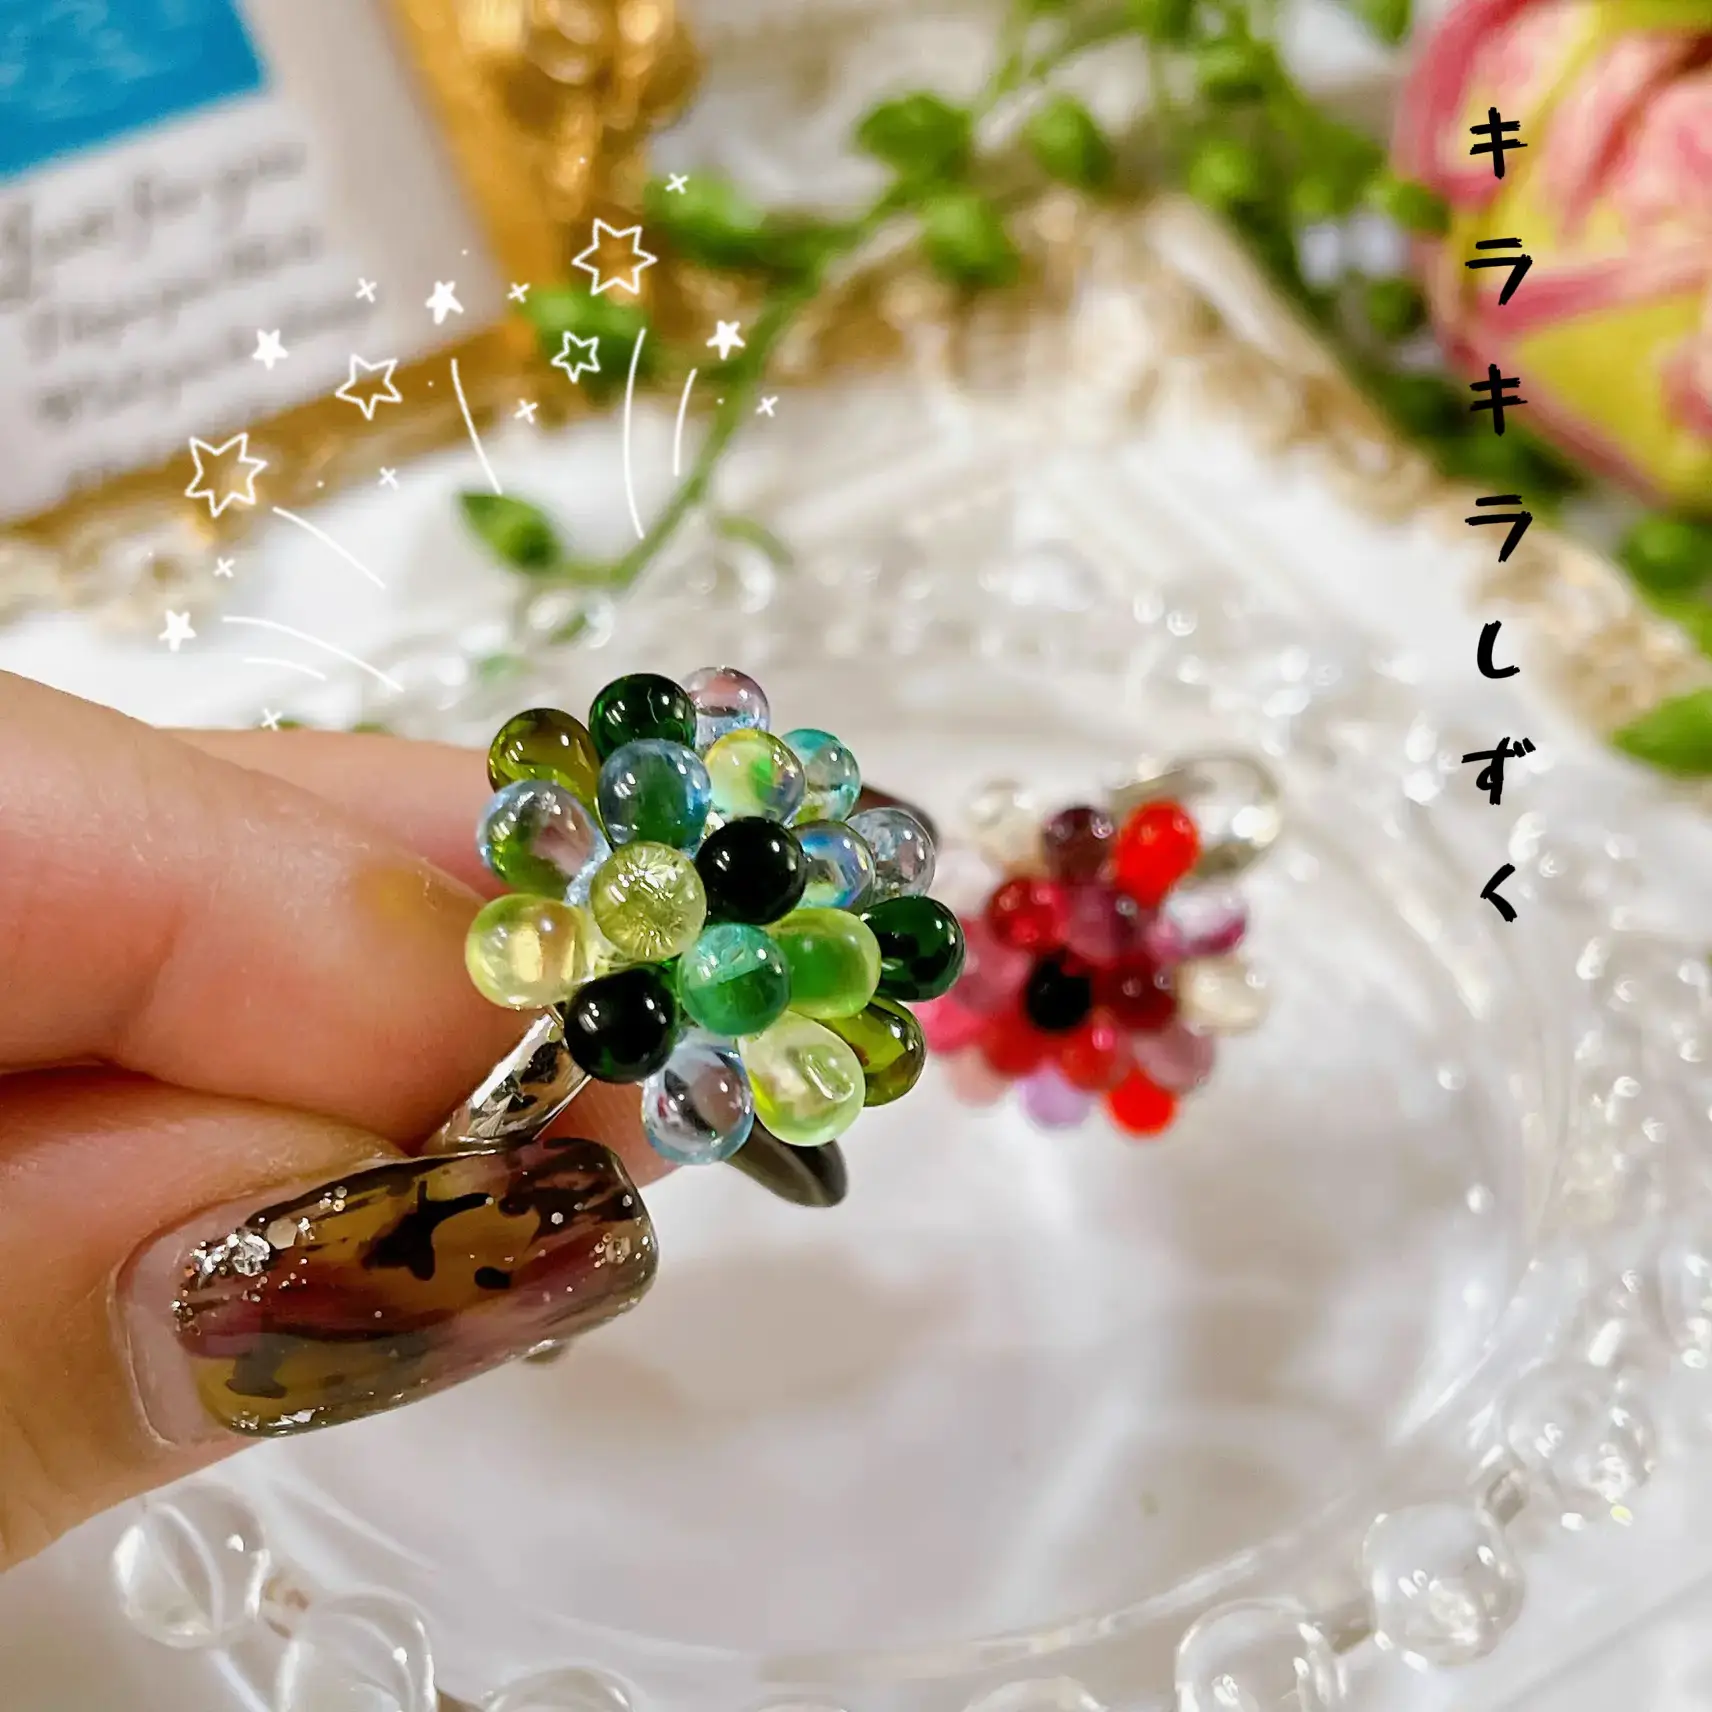 Sparkling drop ring💍 | Gallery posted by KUKUNA/ハンドメイド | Lemon8